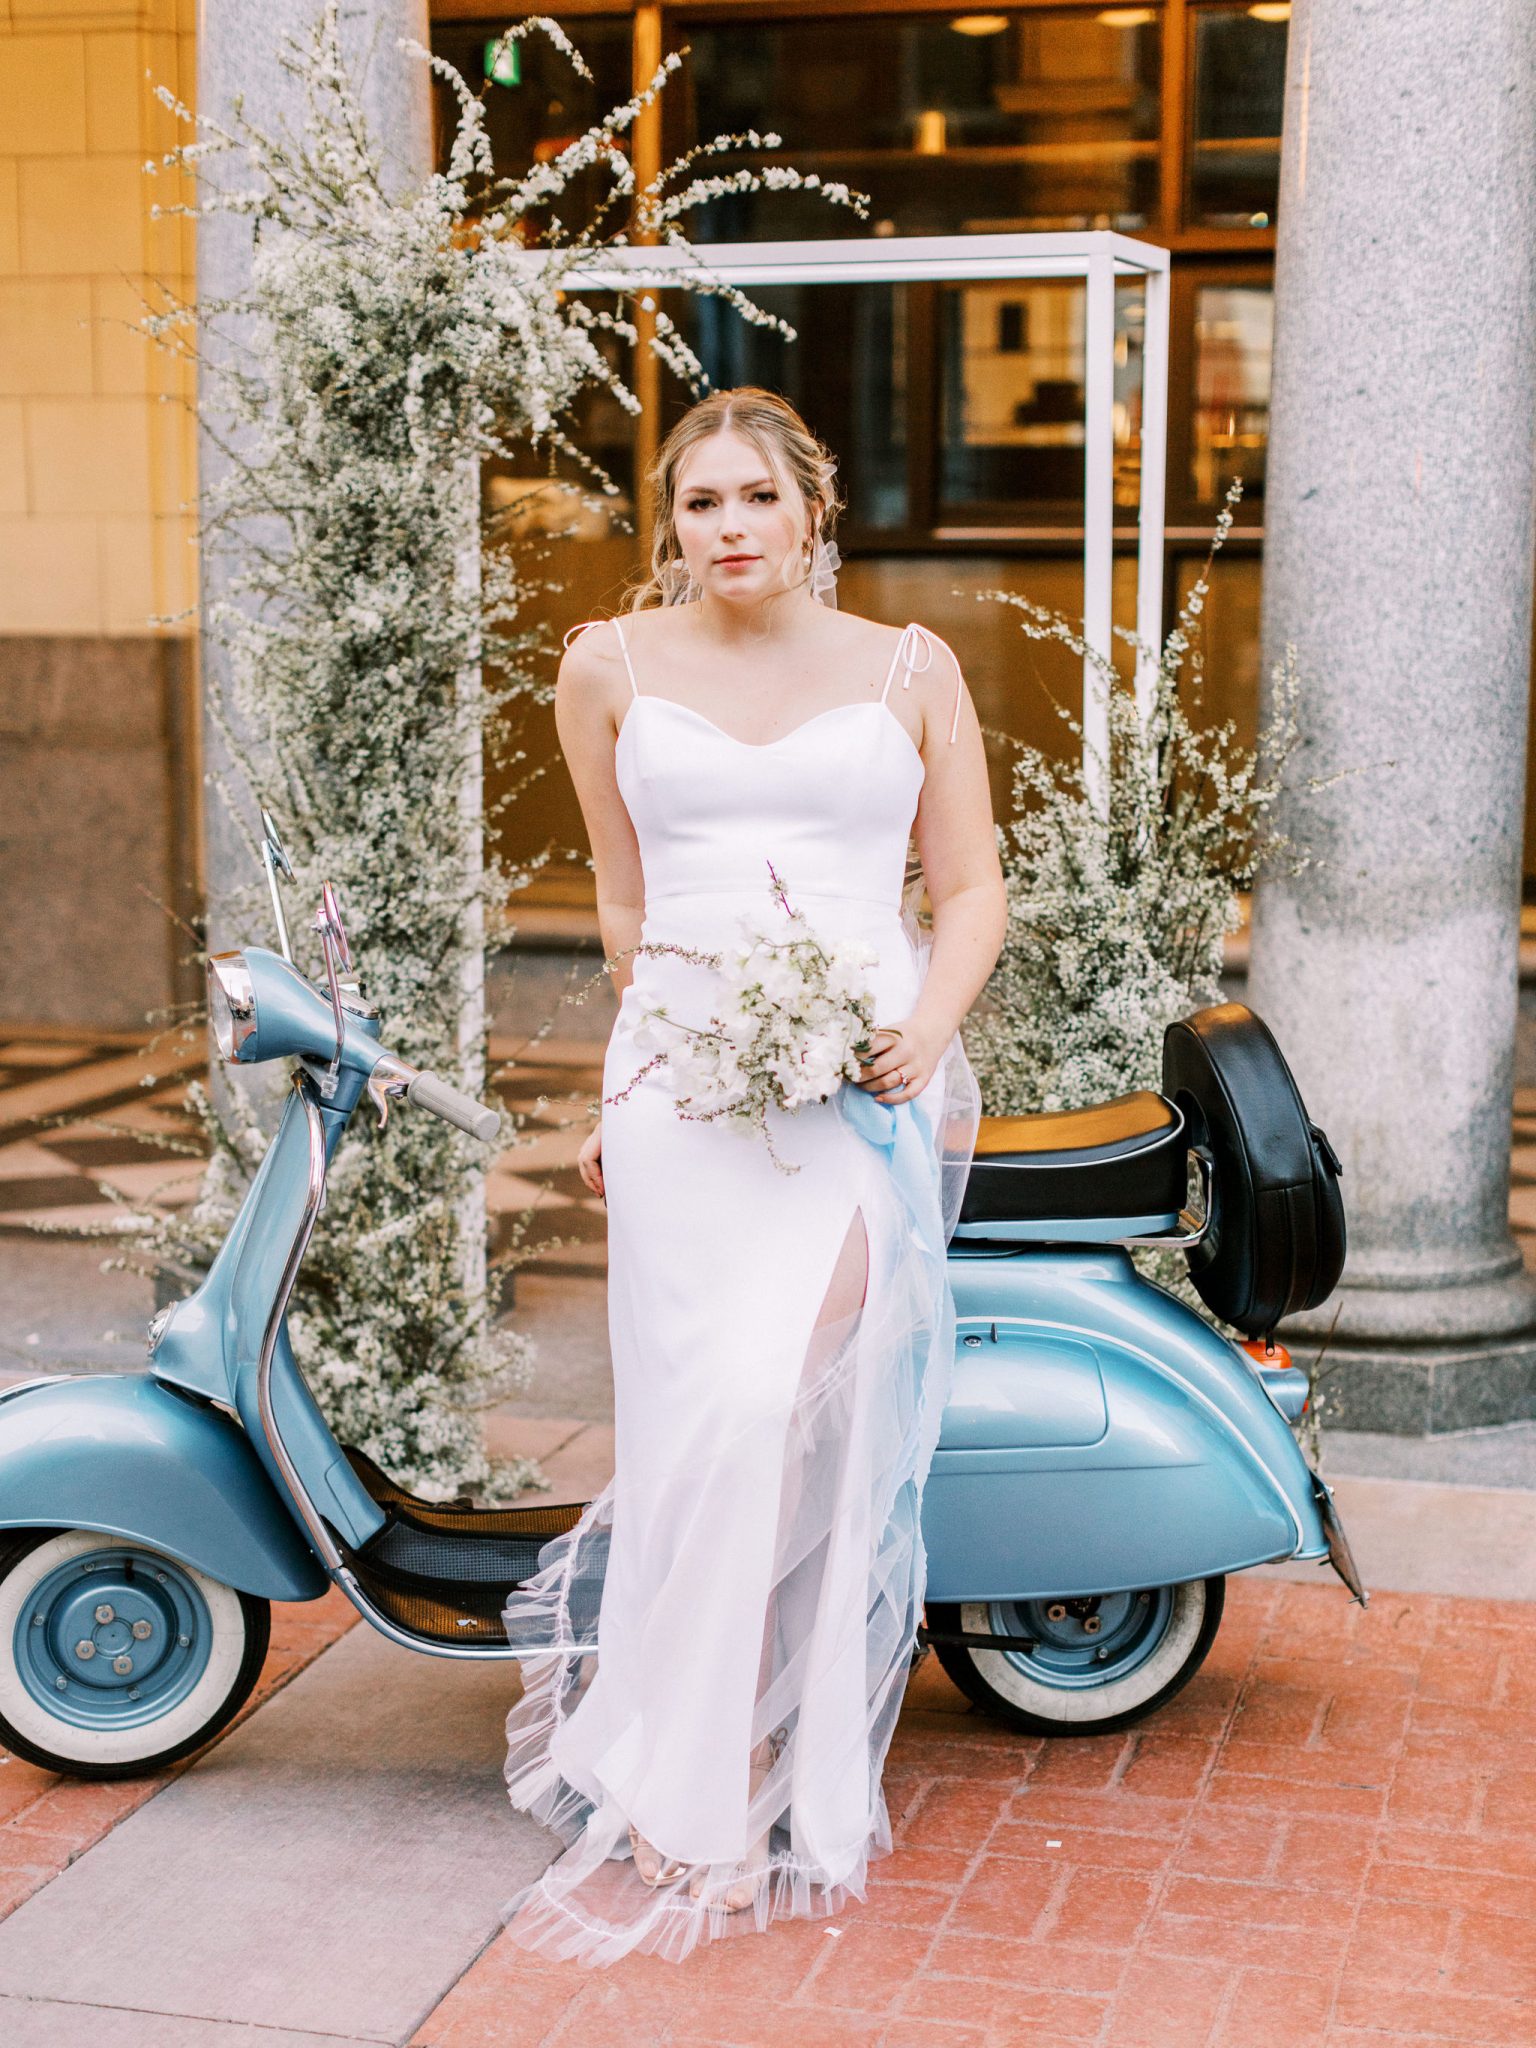 Modern bride in a white slip dress poses in front of a blue vespa with a green and white floral installation behind her for this modern downtown elopement inspiration